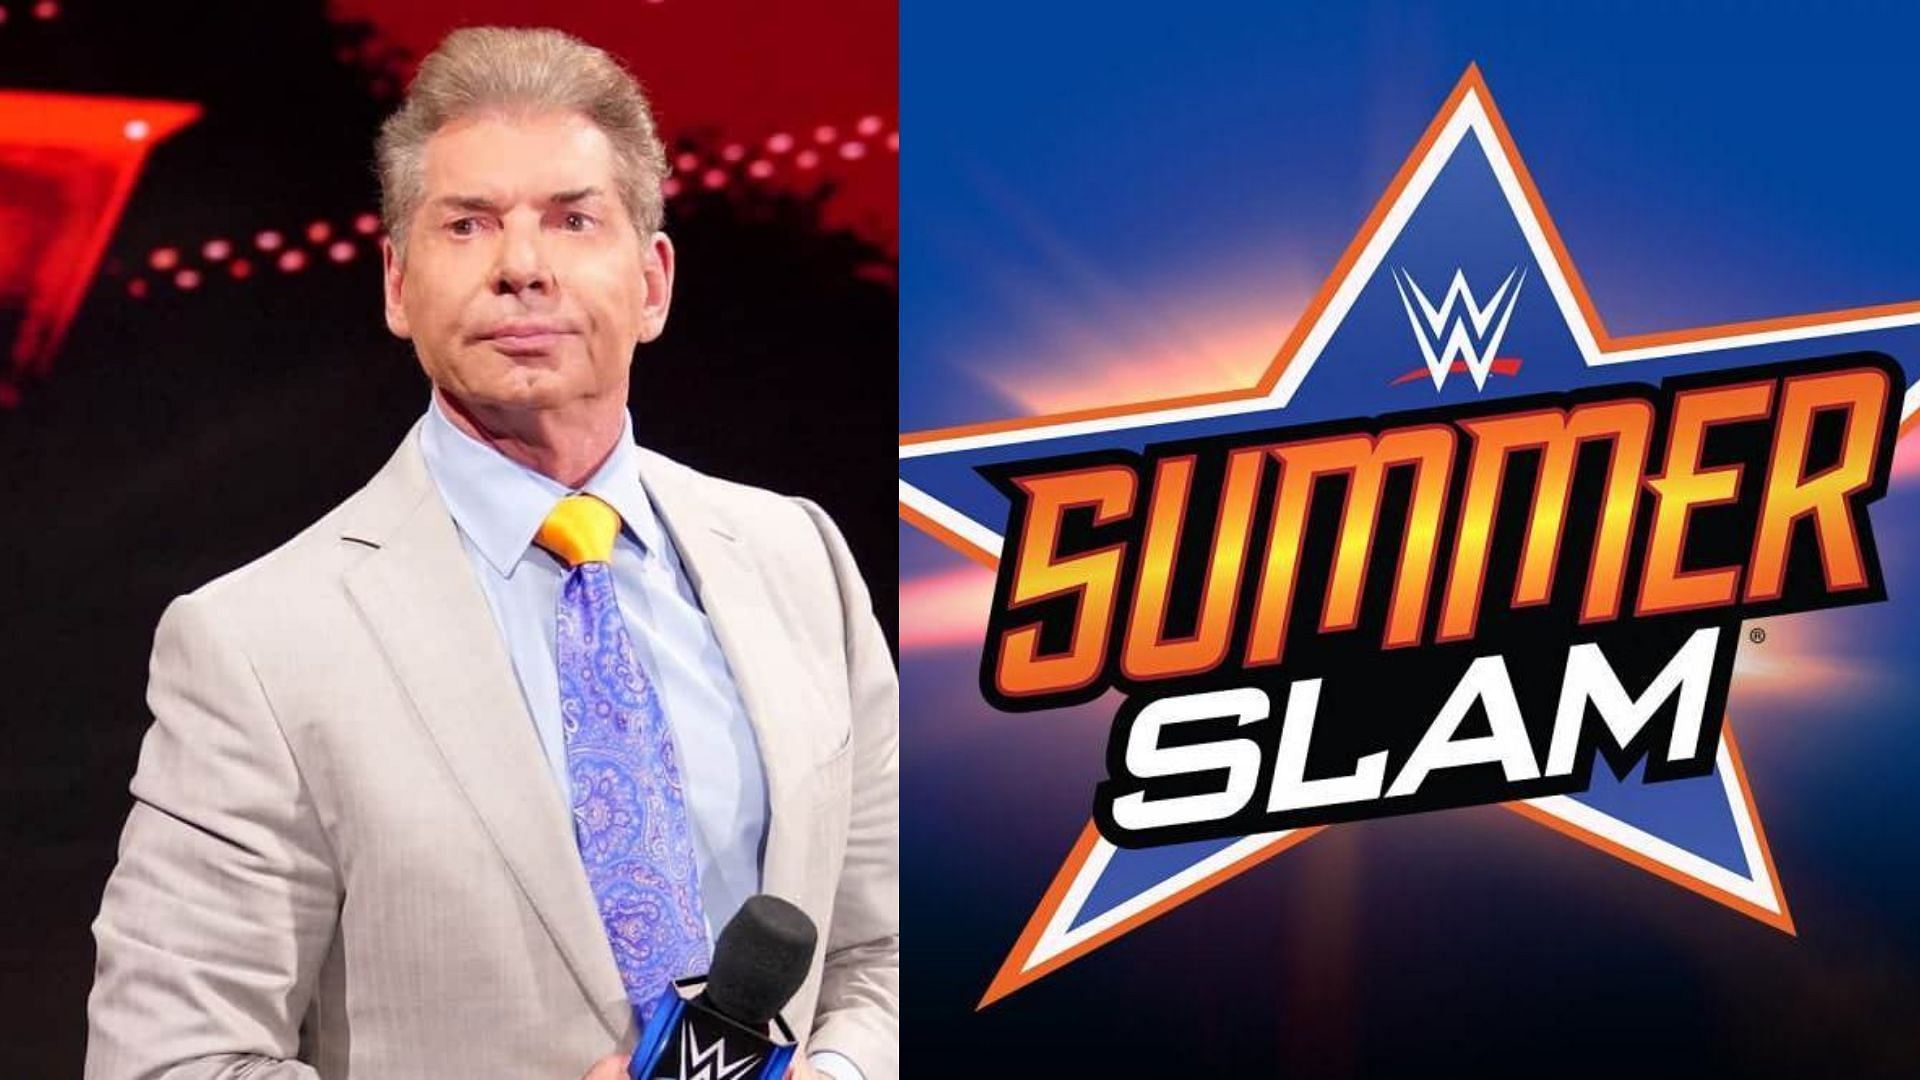 Vince McMahon averted disaster at SummerSlam many years ago.